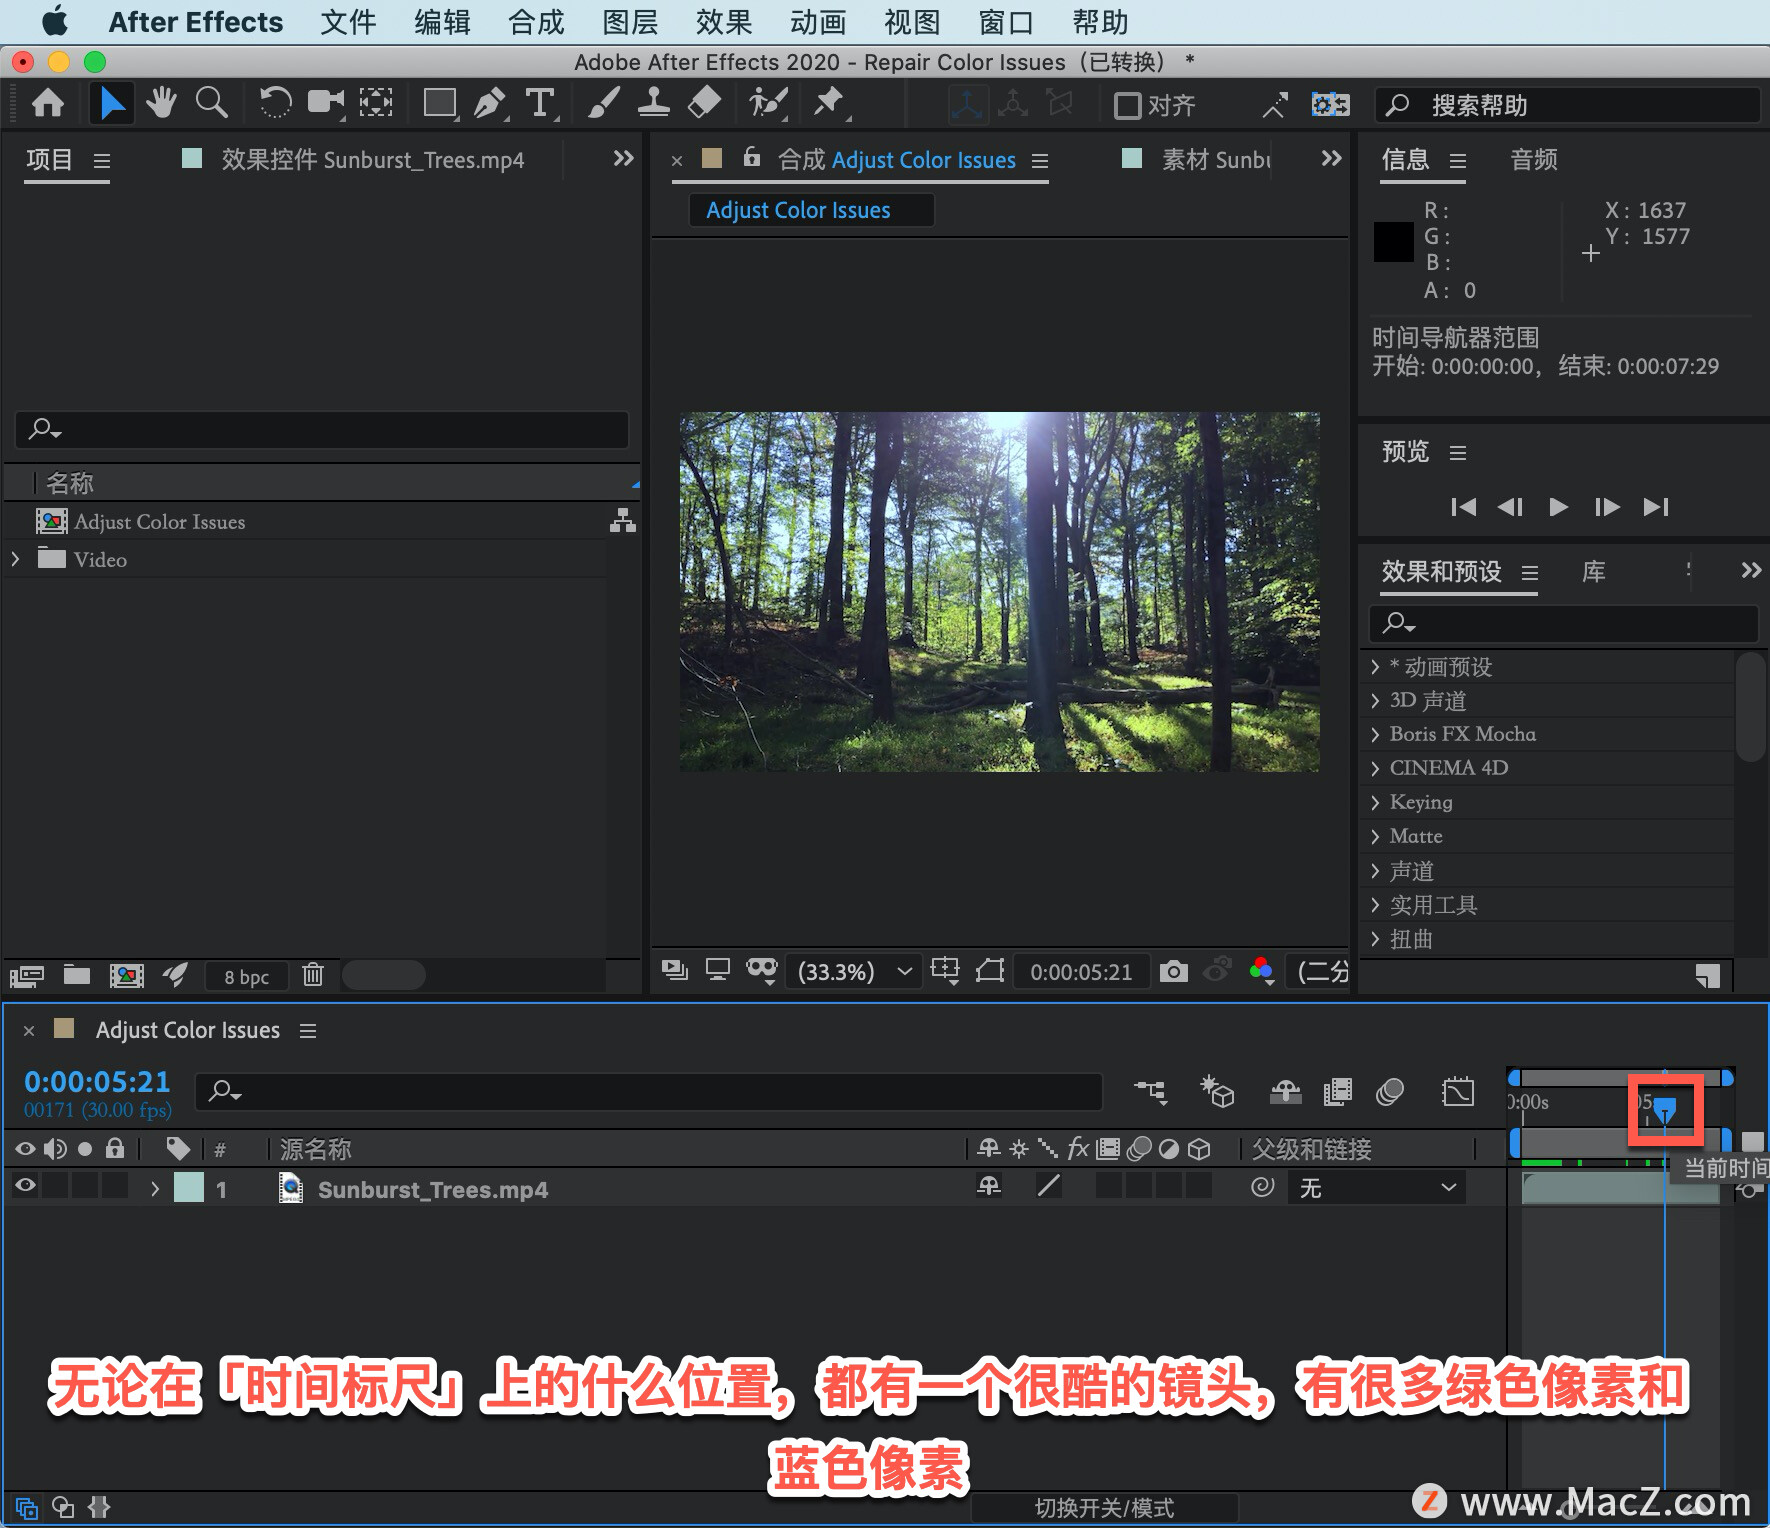 After Effects 教程「23」，如何在 After Effects 中增强视频中的颜色？